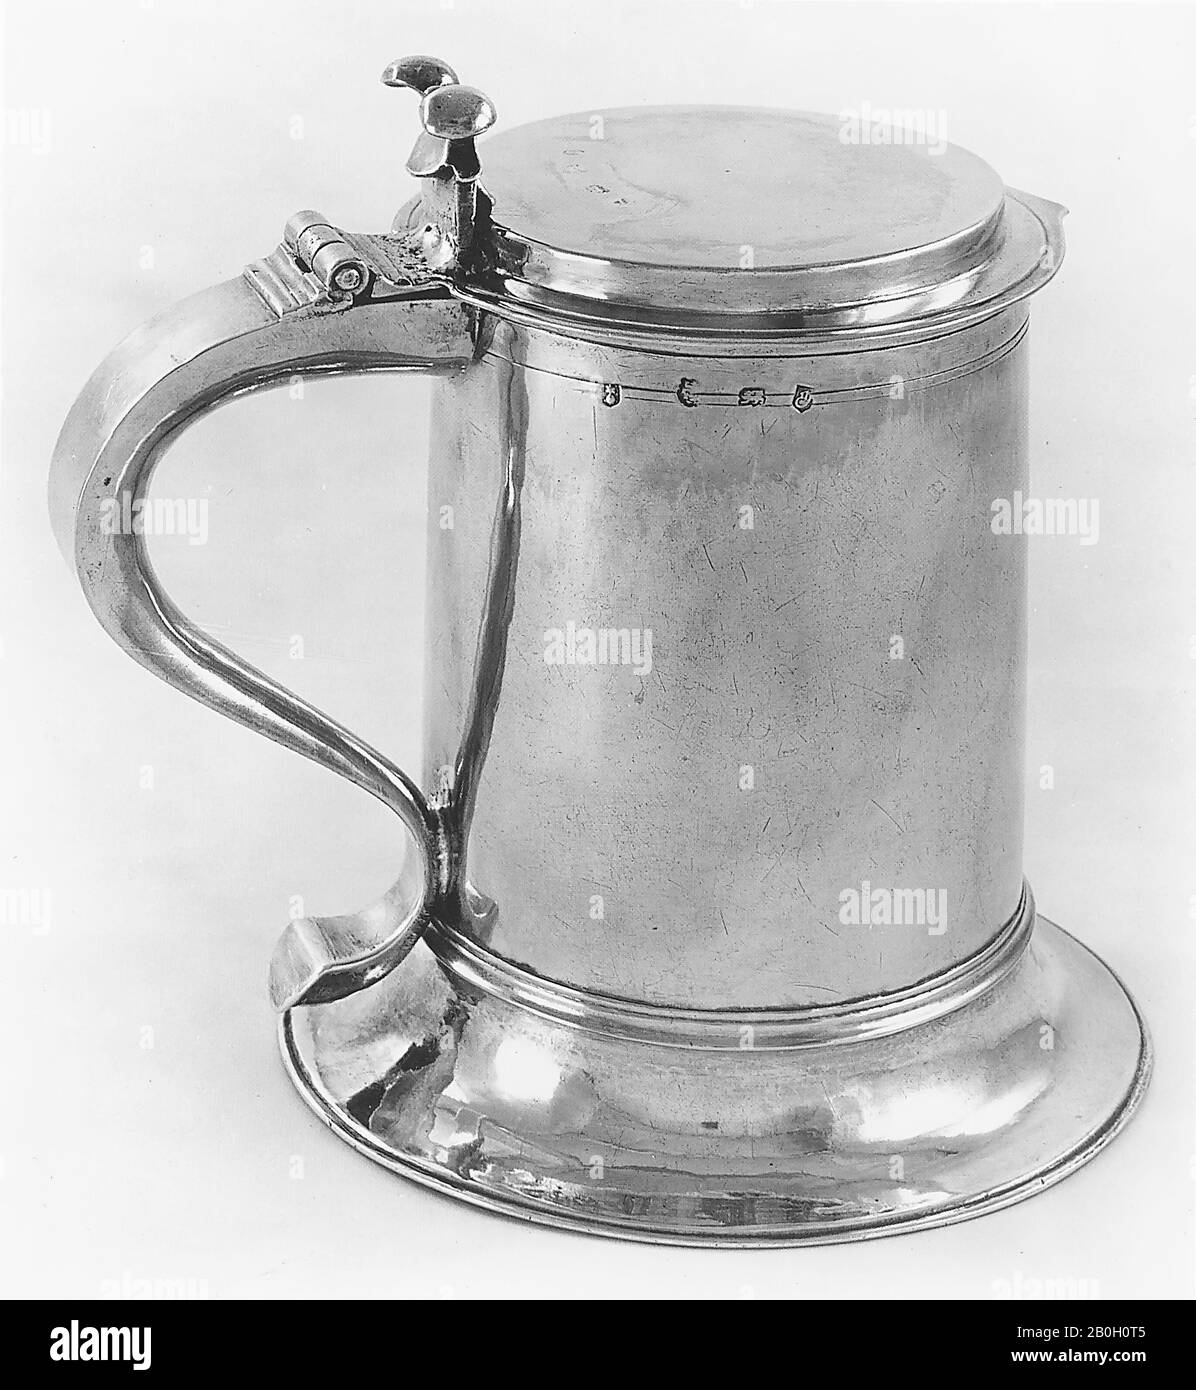 Maker's mark orb and star with annulets, English, Tankard, 1649/50, Silver, 7 15/16 x 8 1/2 x 6 3/4 in. (20.2 x 21.6 x 17.1 cm Stock Photo